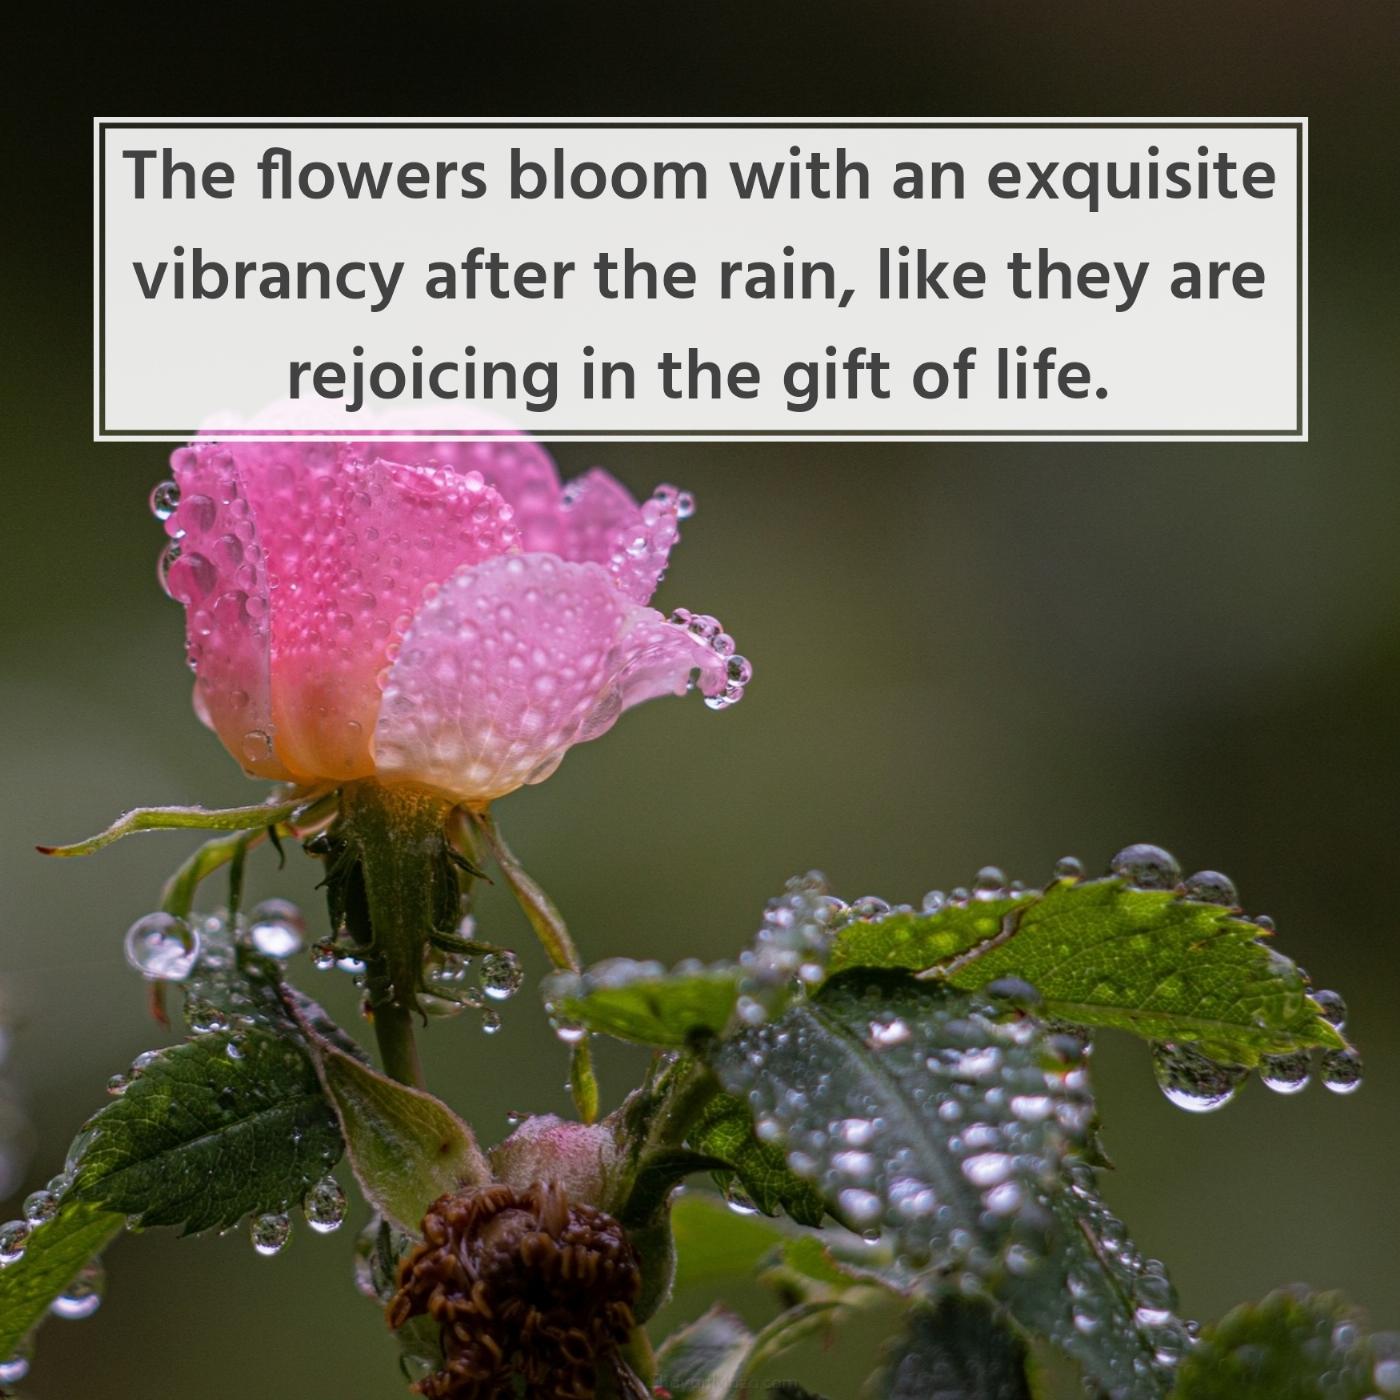 The flowers bloom with an exquisite vibrancy after the rain